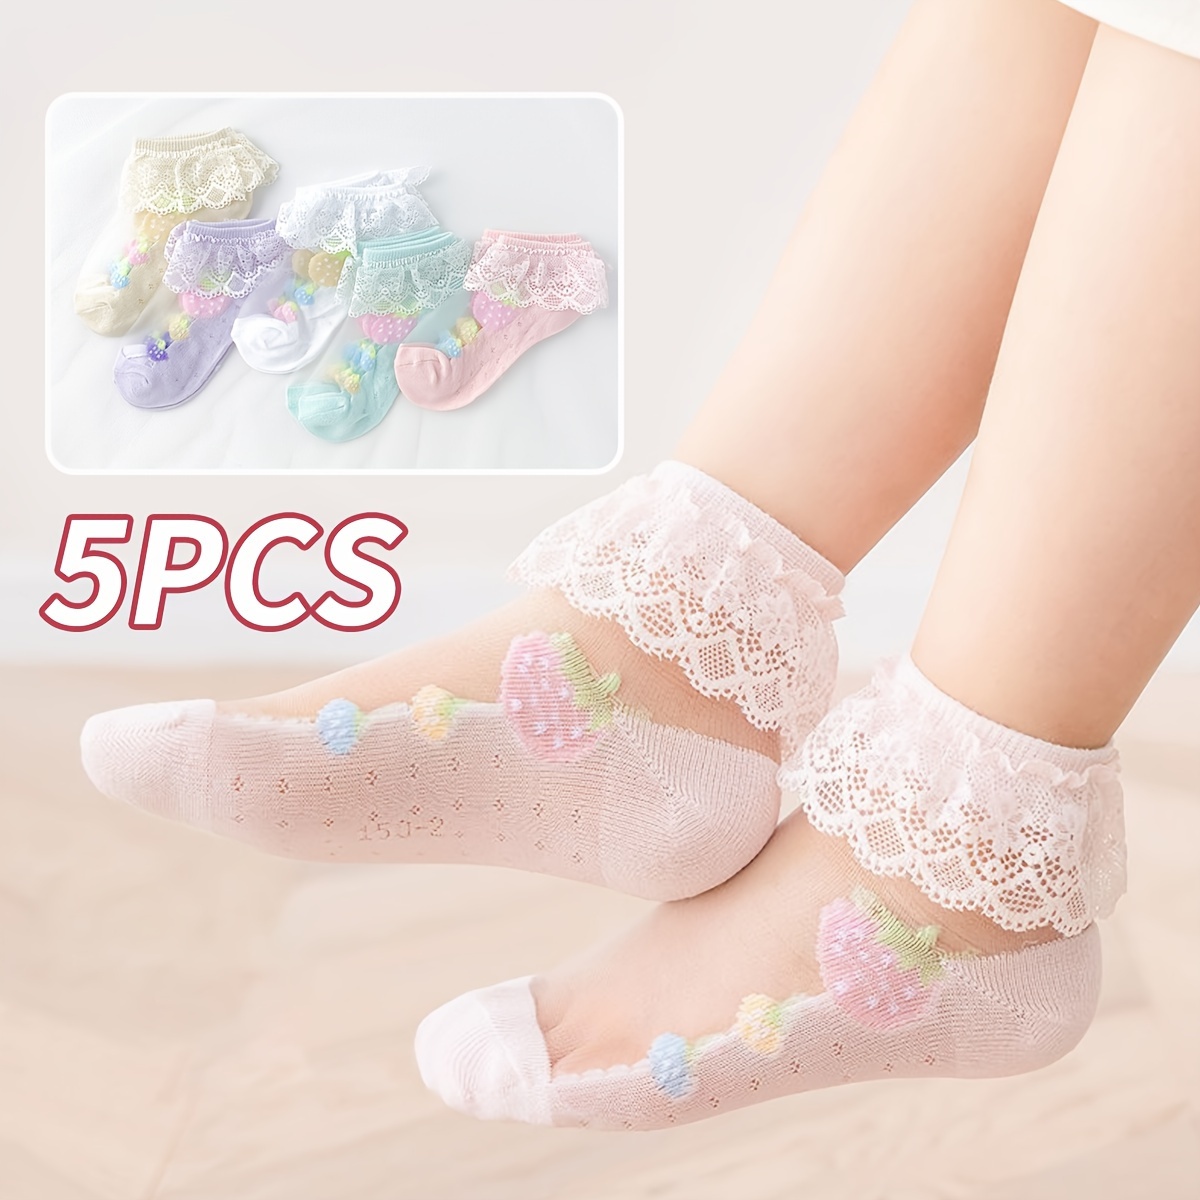 

5 Pairs Of Baby Girl's Lace Mesh & Thin Crew Socks, Comfy Breathable Casual Soft & Elastic Princess Style Socks, Spring & Summer